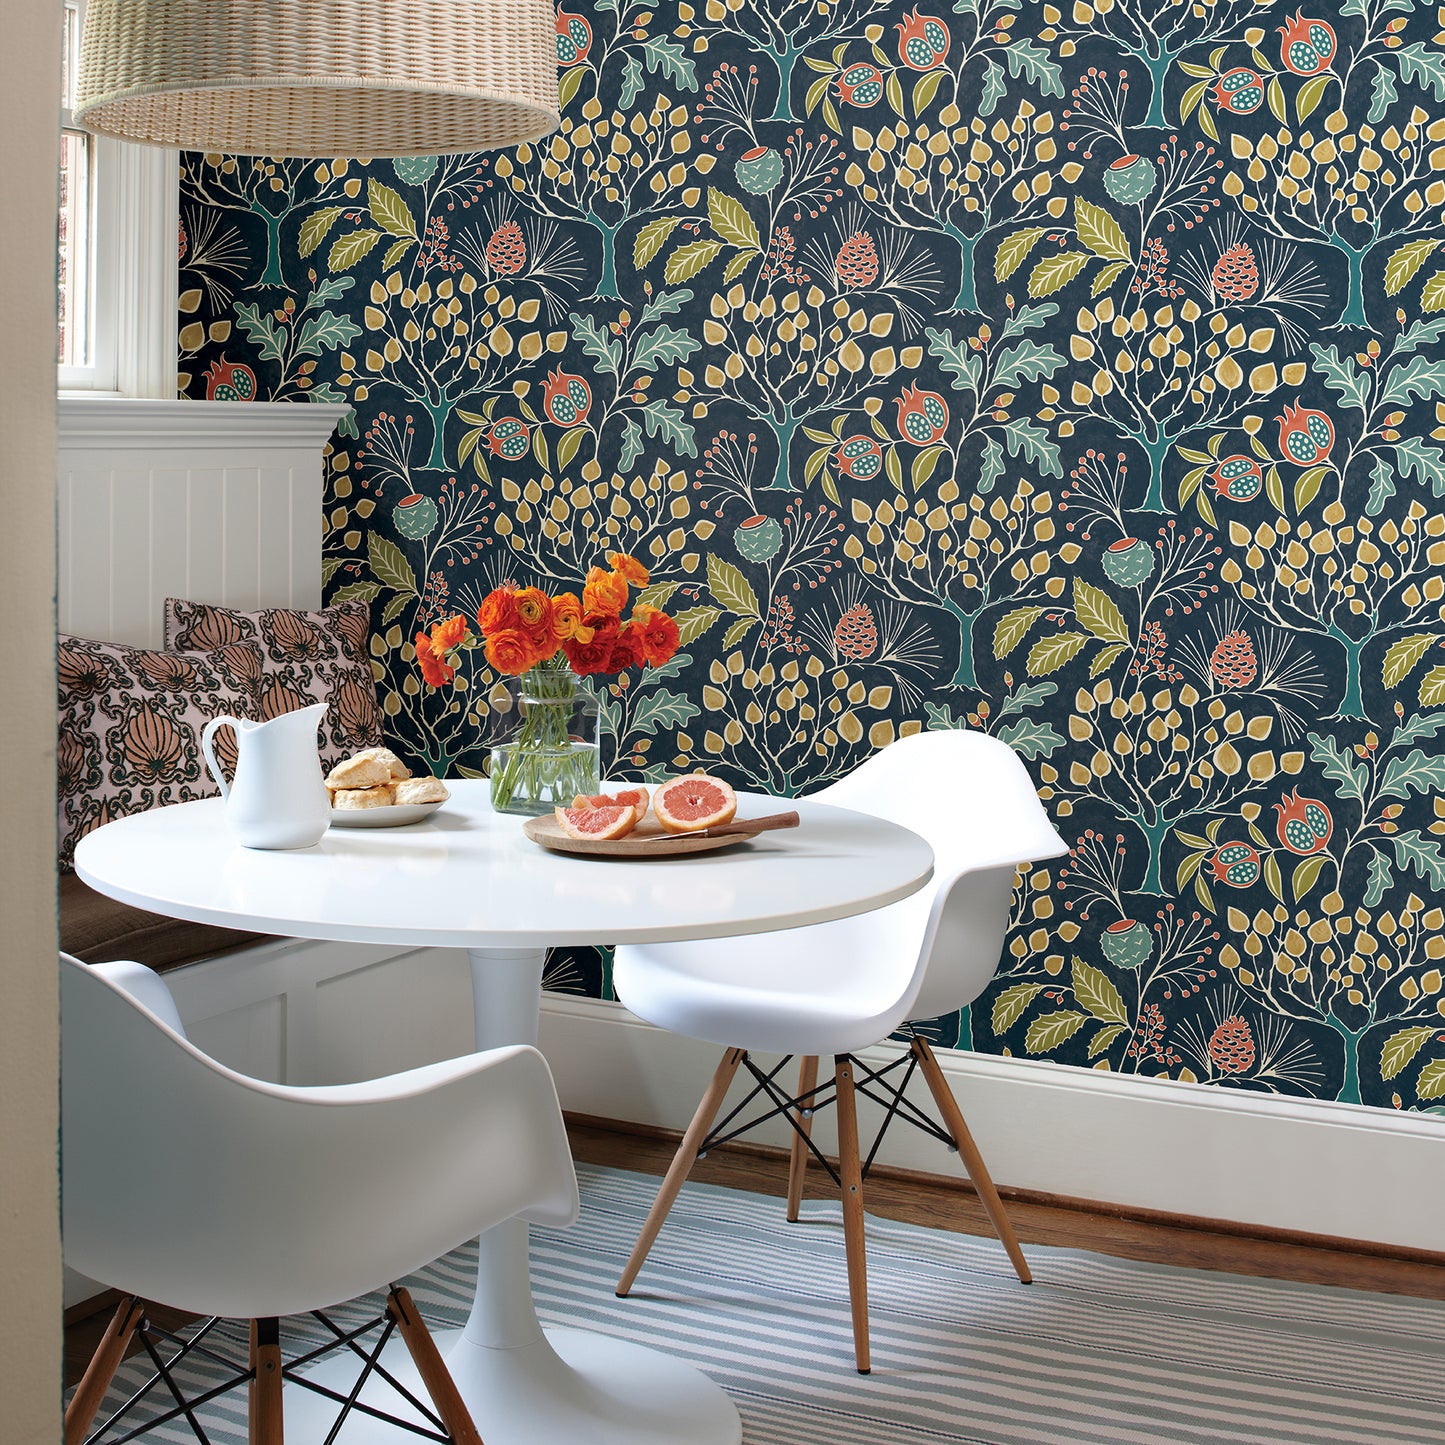 Acquire 2903-25830 Blue Bell Shiloh Navy Botanical A Street Prints Wallpaper